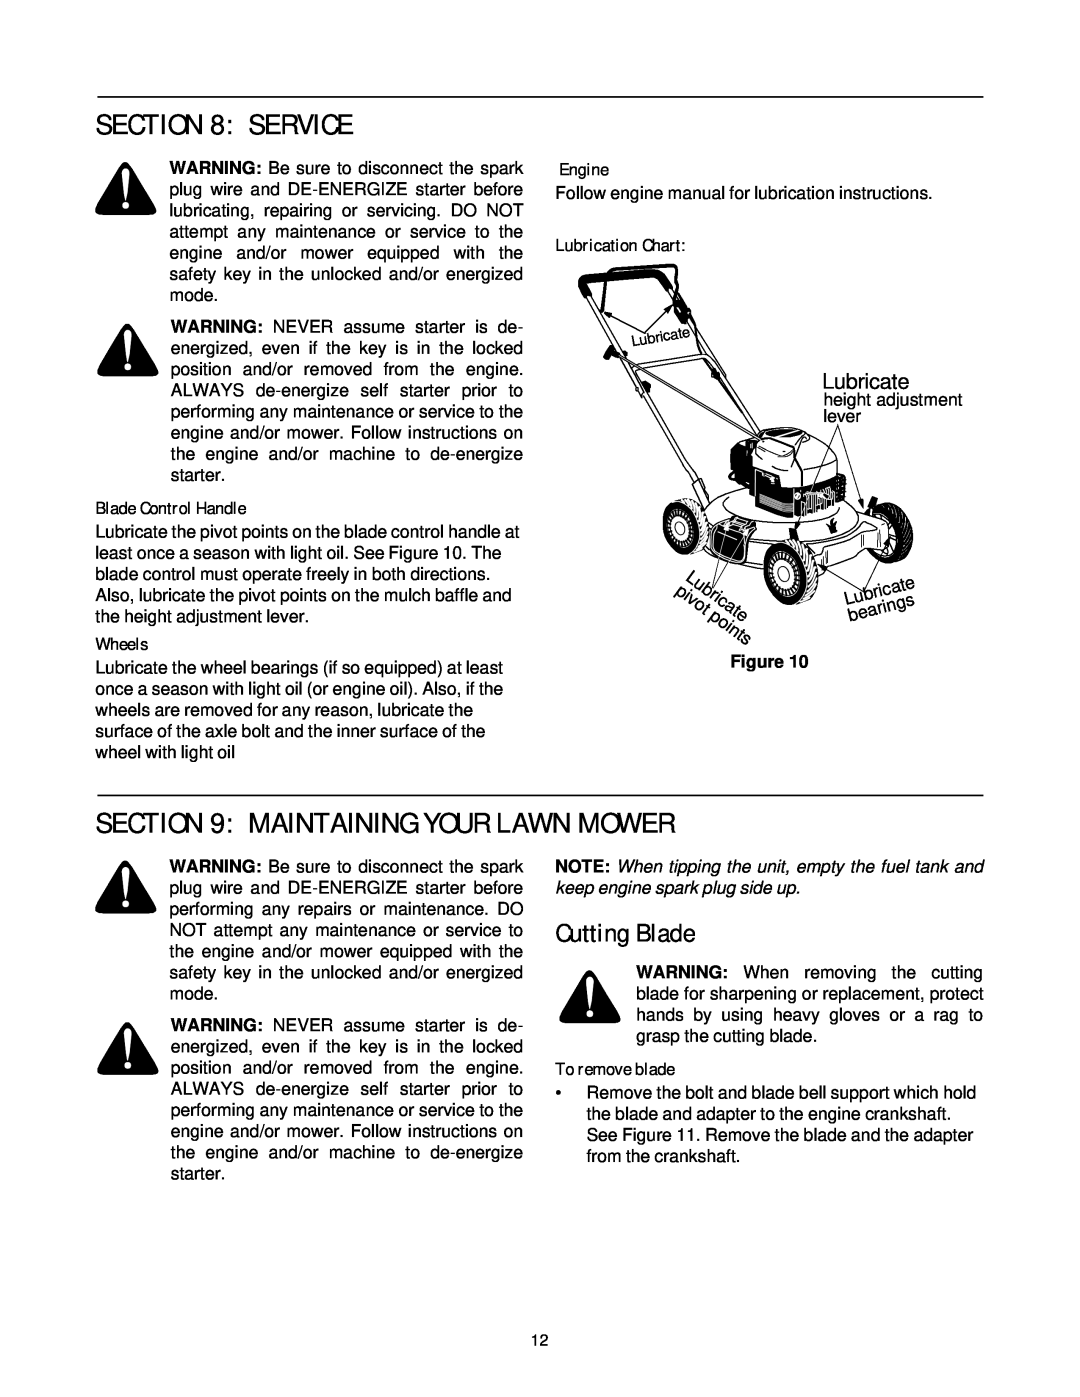 Yard-Man 109T manual Service, Maintaining Your Lawn Mower, Cutting Blade 